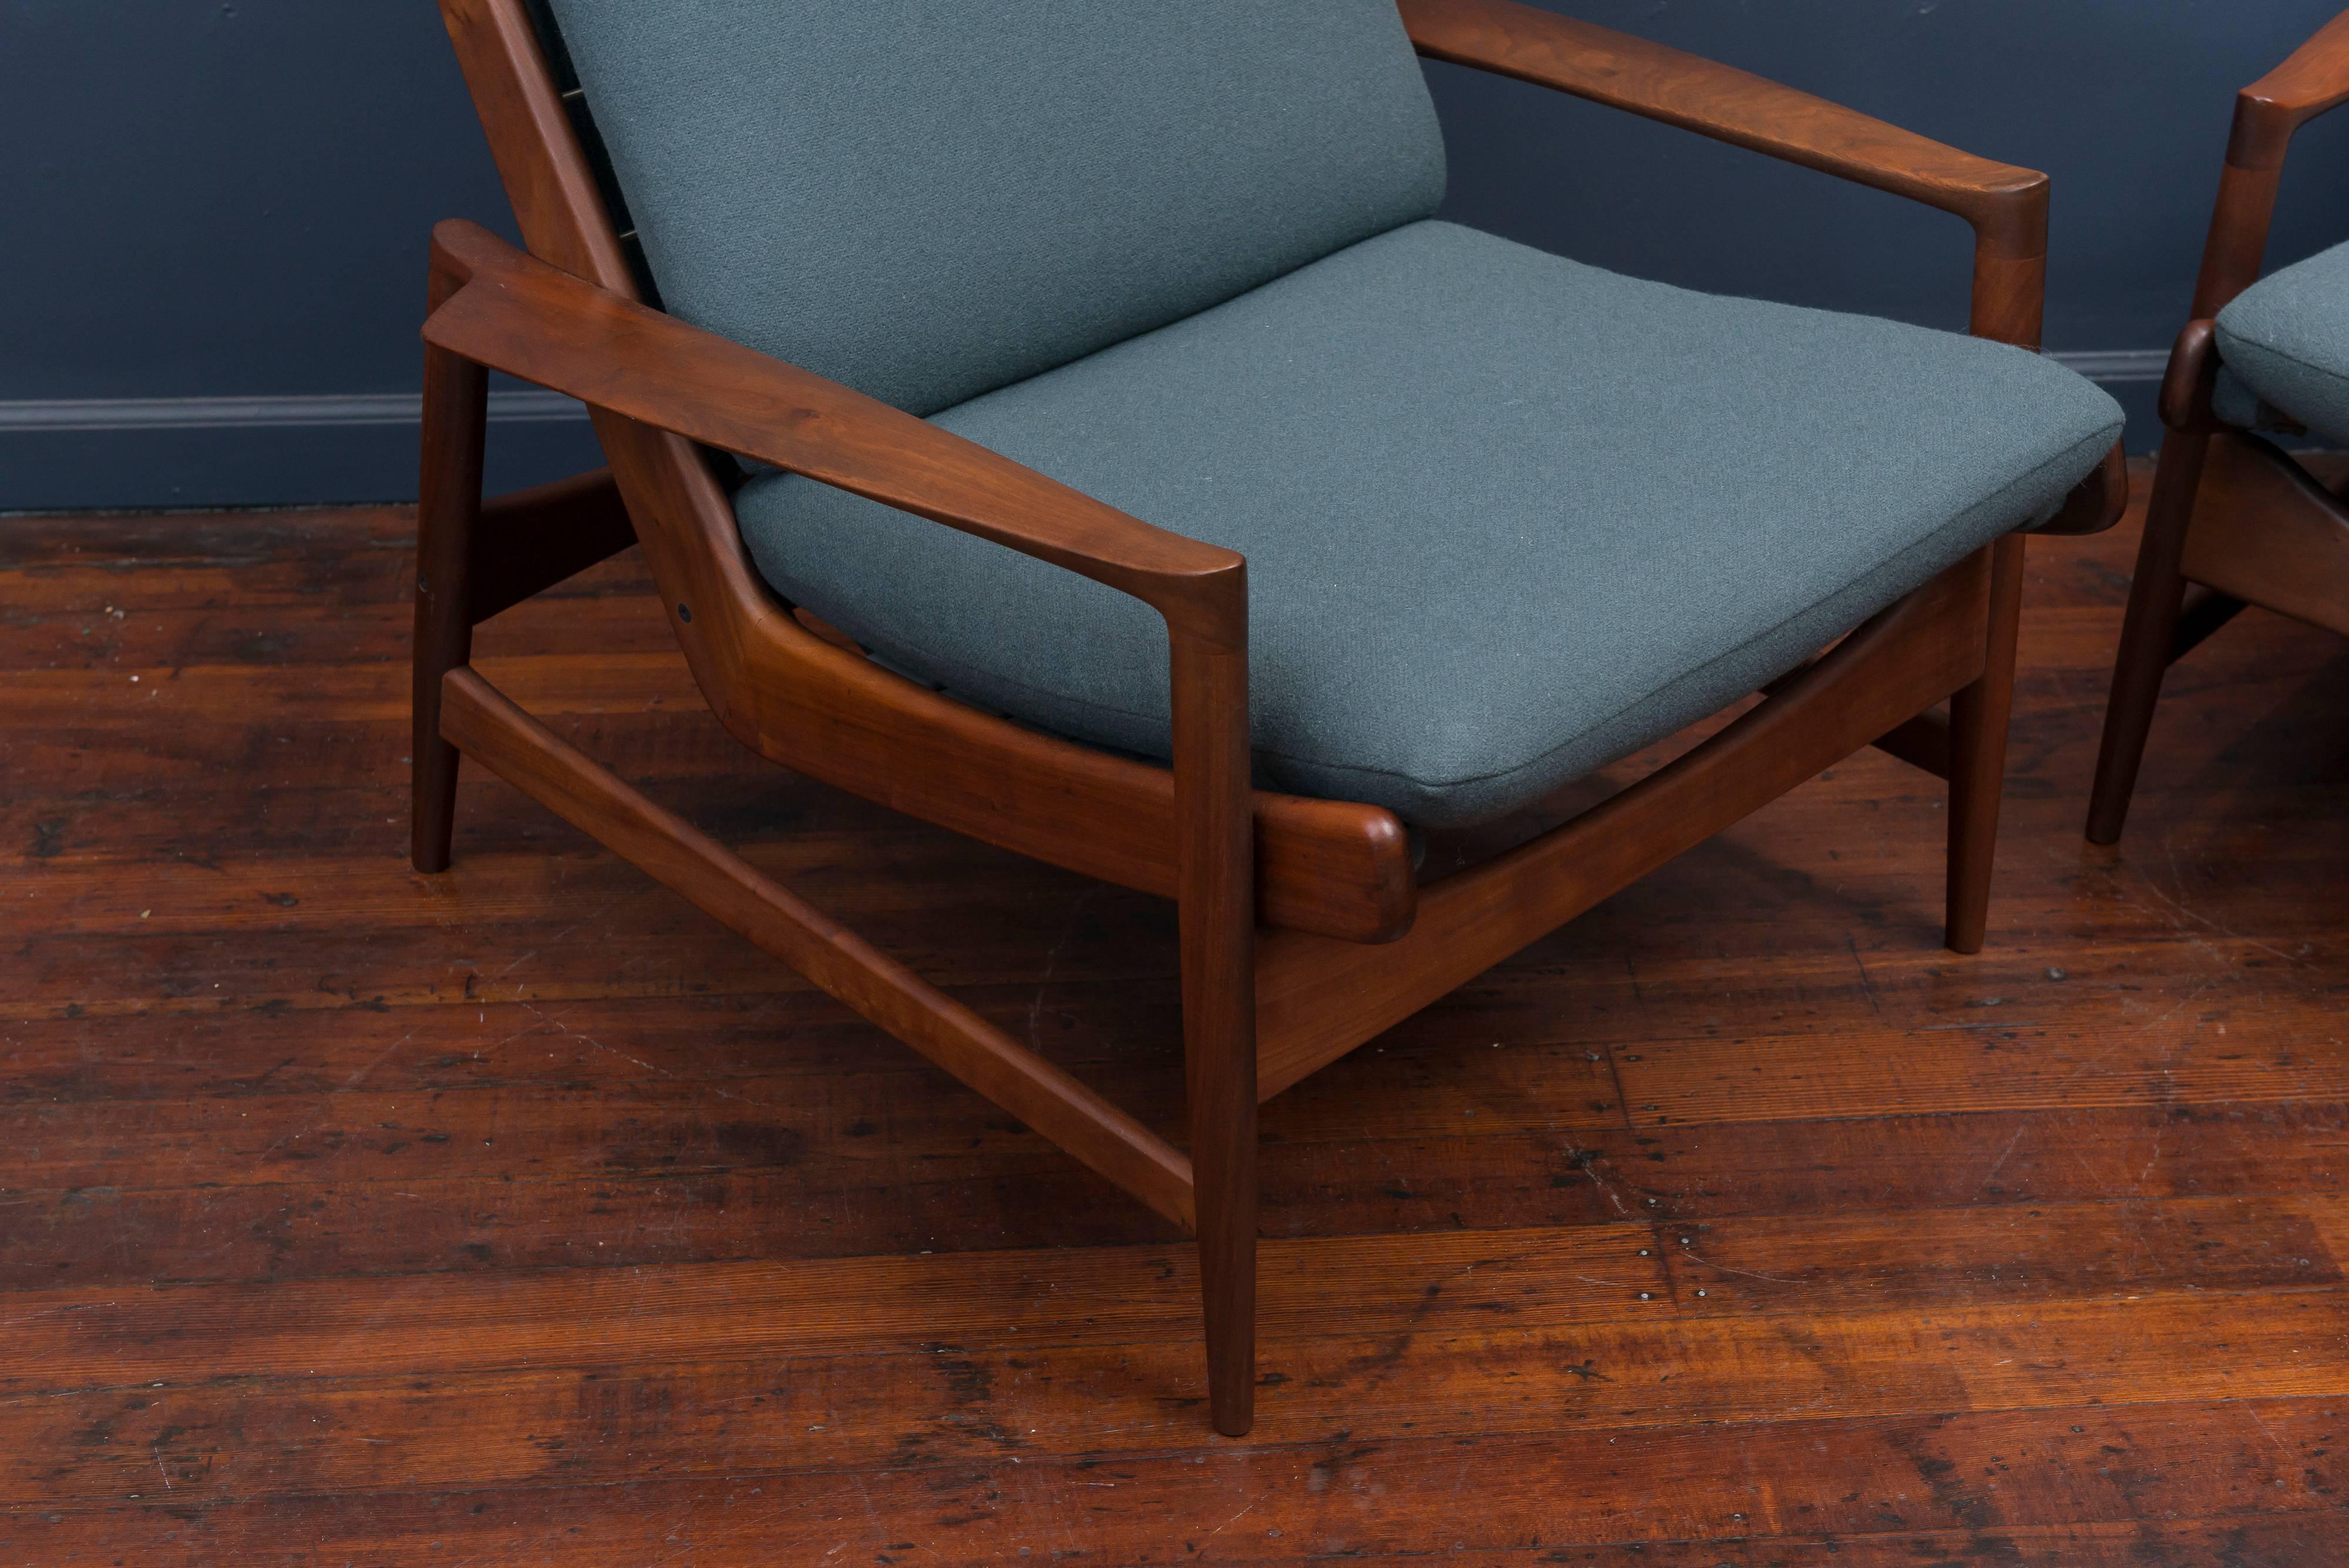 Fantastic pair of Ib Kofod-Larsen design high back lounge chairs. Perfectly upholstered in a deep teal wool and oiled teak frames.